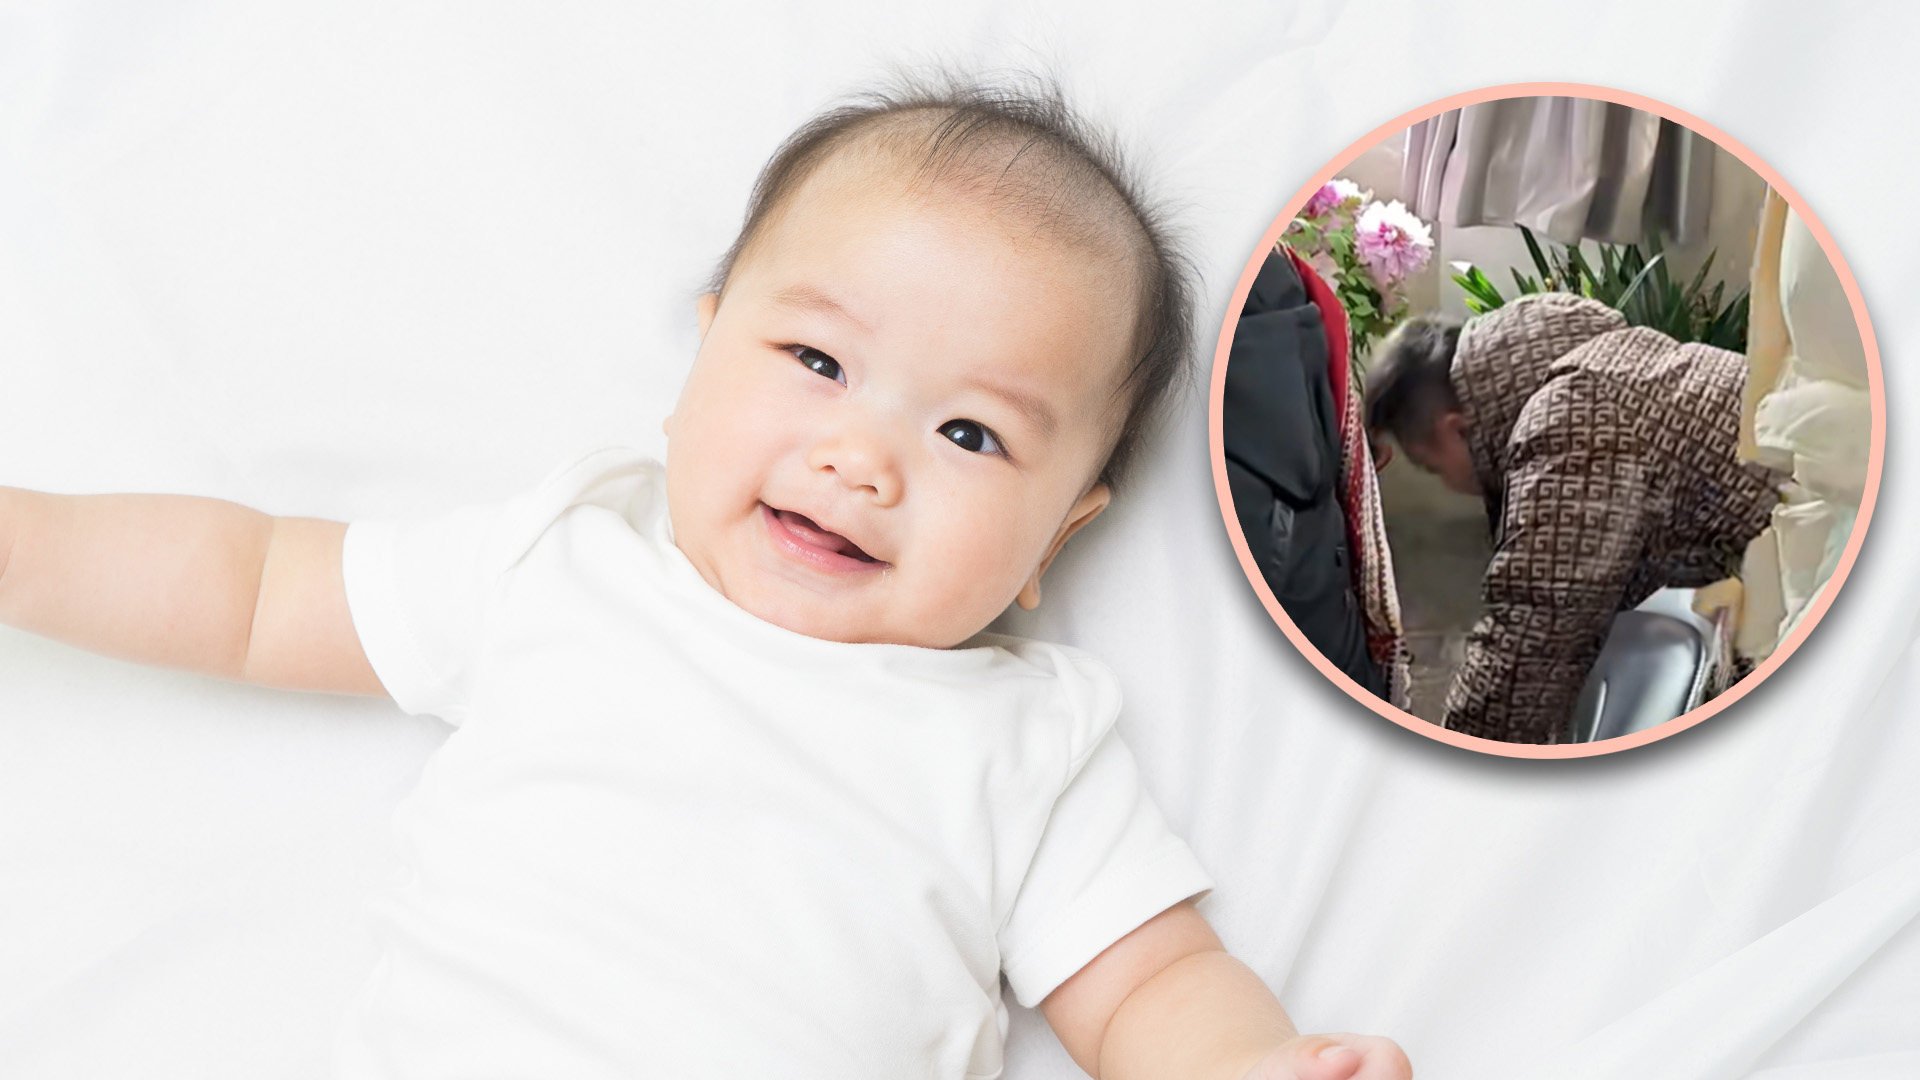 A childless couple in China were so happy to have finally conceived after eight years of trying that they knelt weeping in thanks before the traditional Chinese medicine doctor who helped them. Photo: SCMP composite/Shutterstock/Douyin